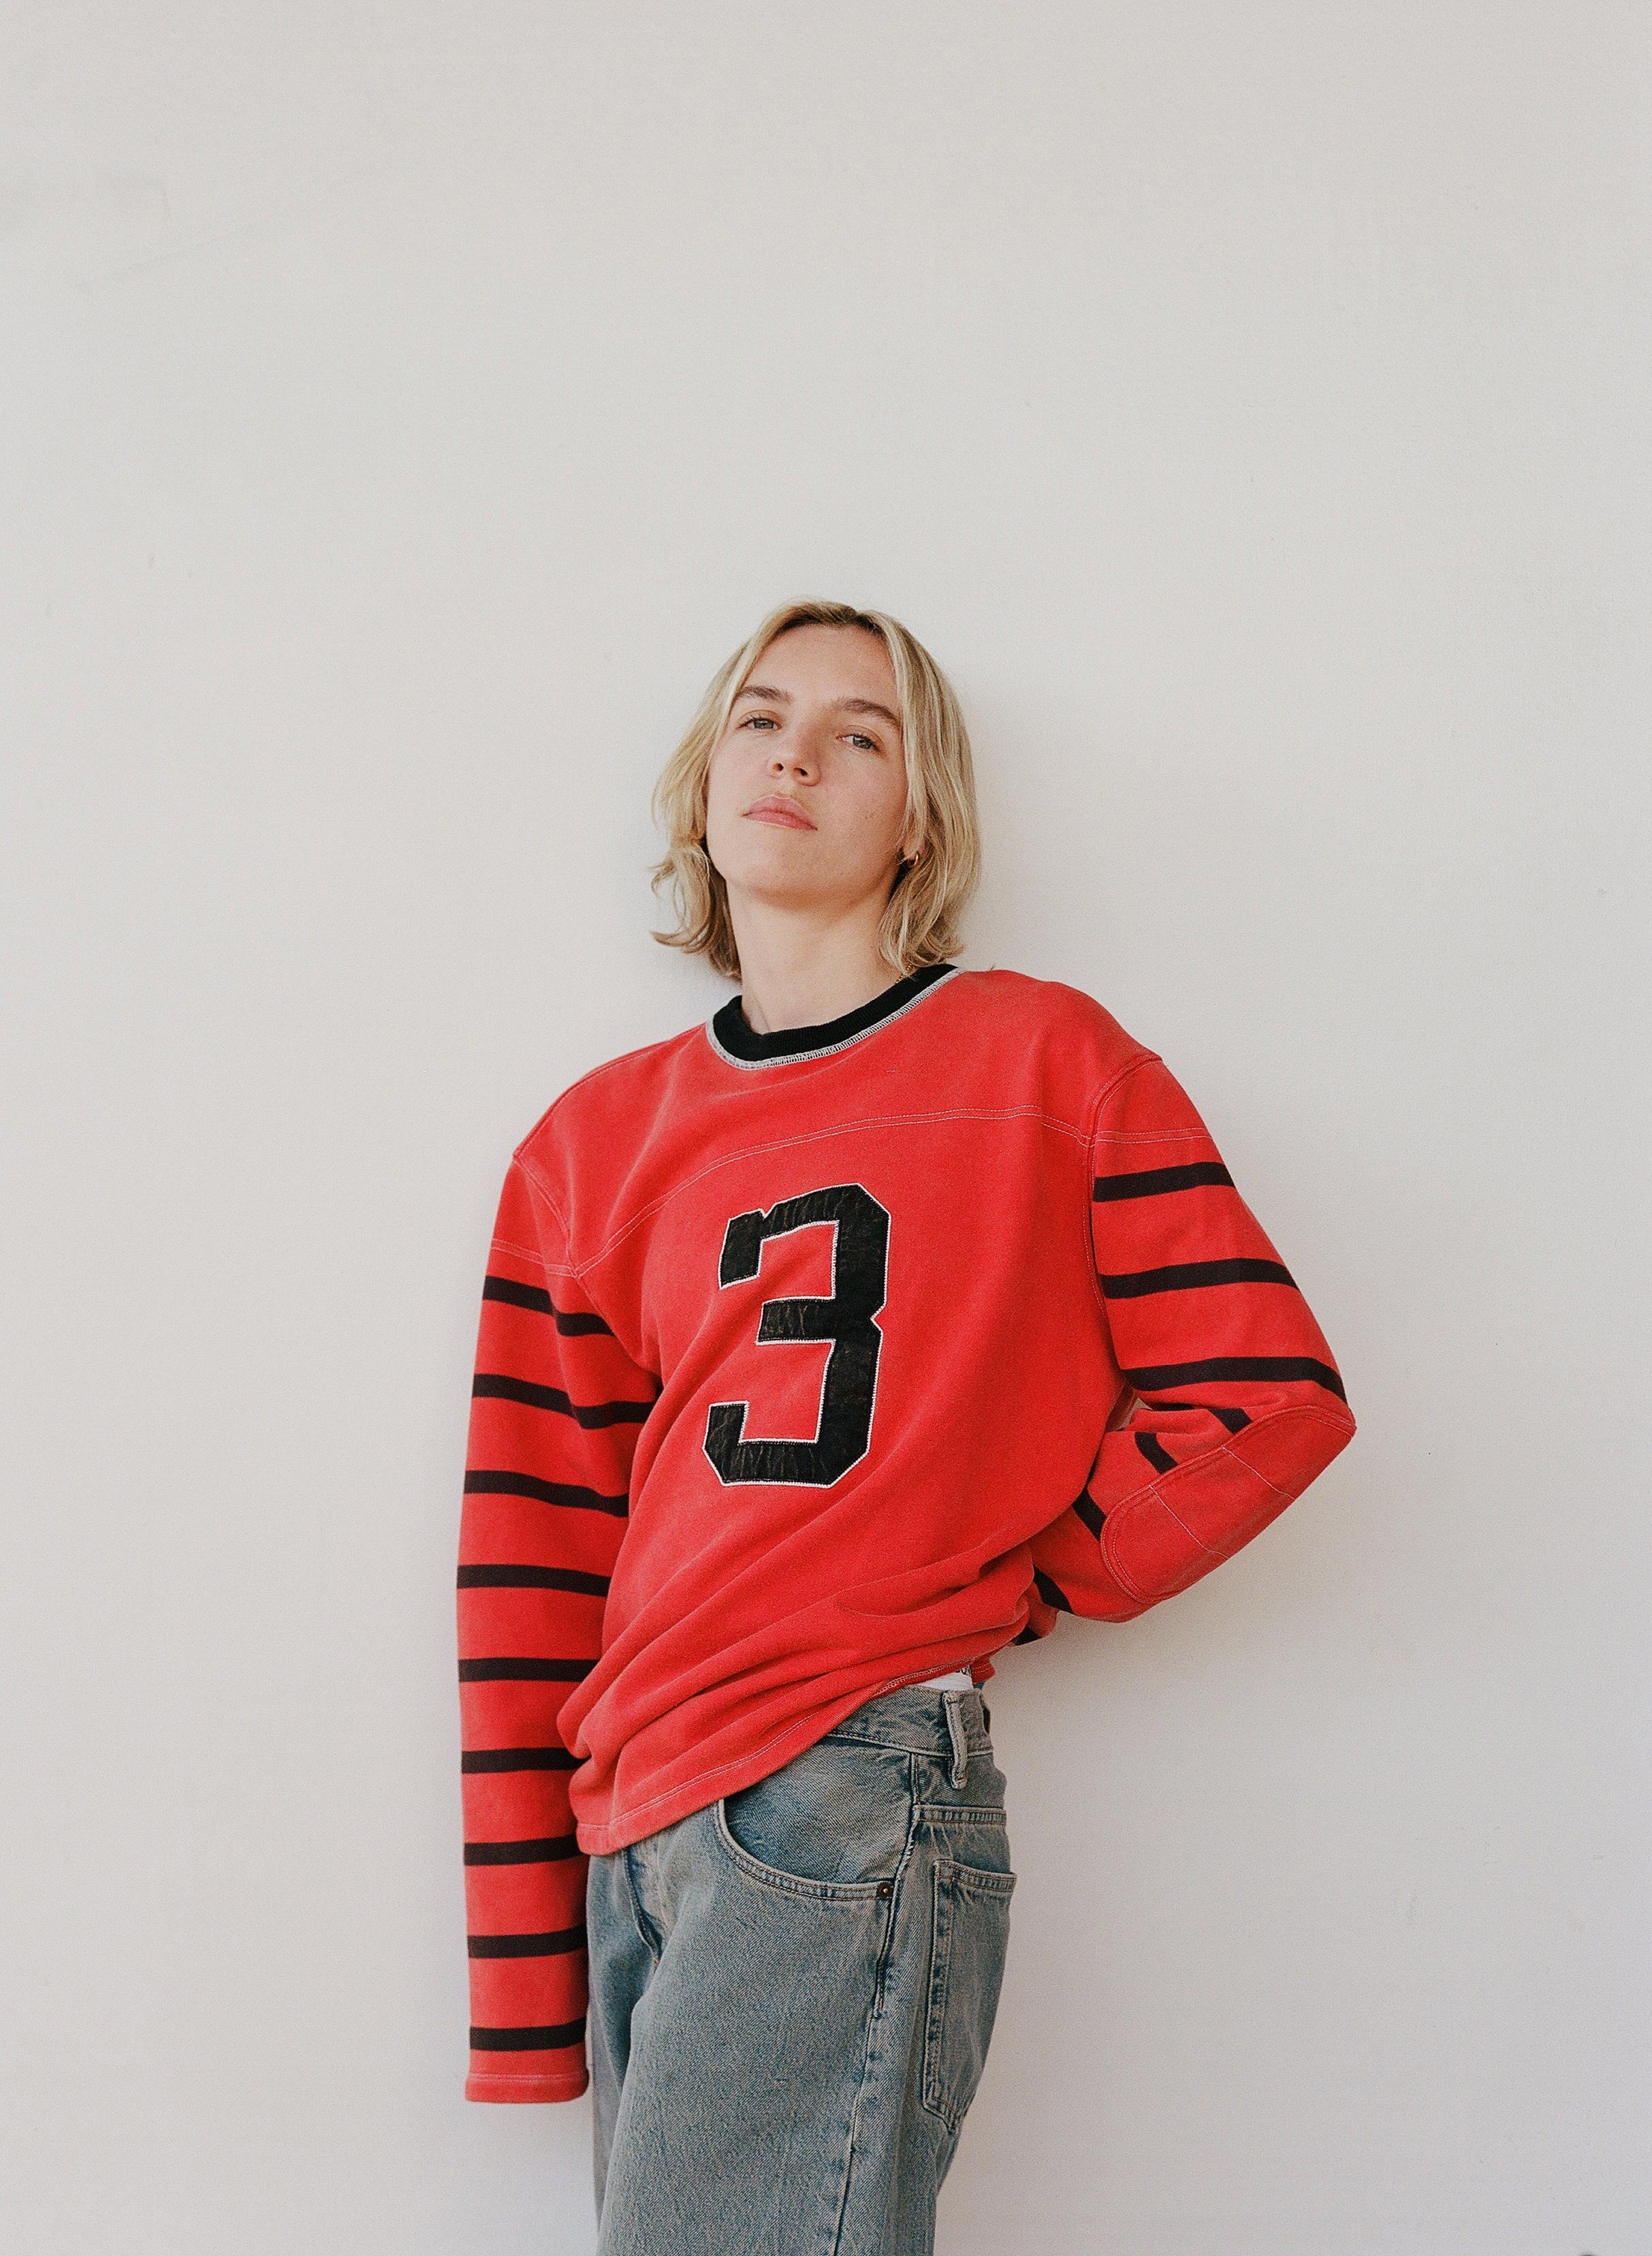 The Japanese House presales in New York